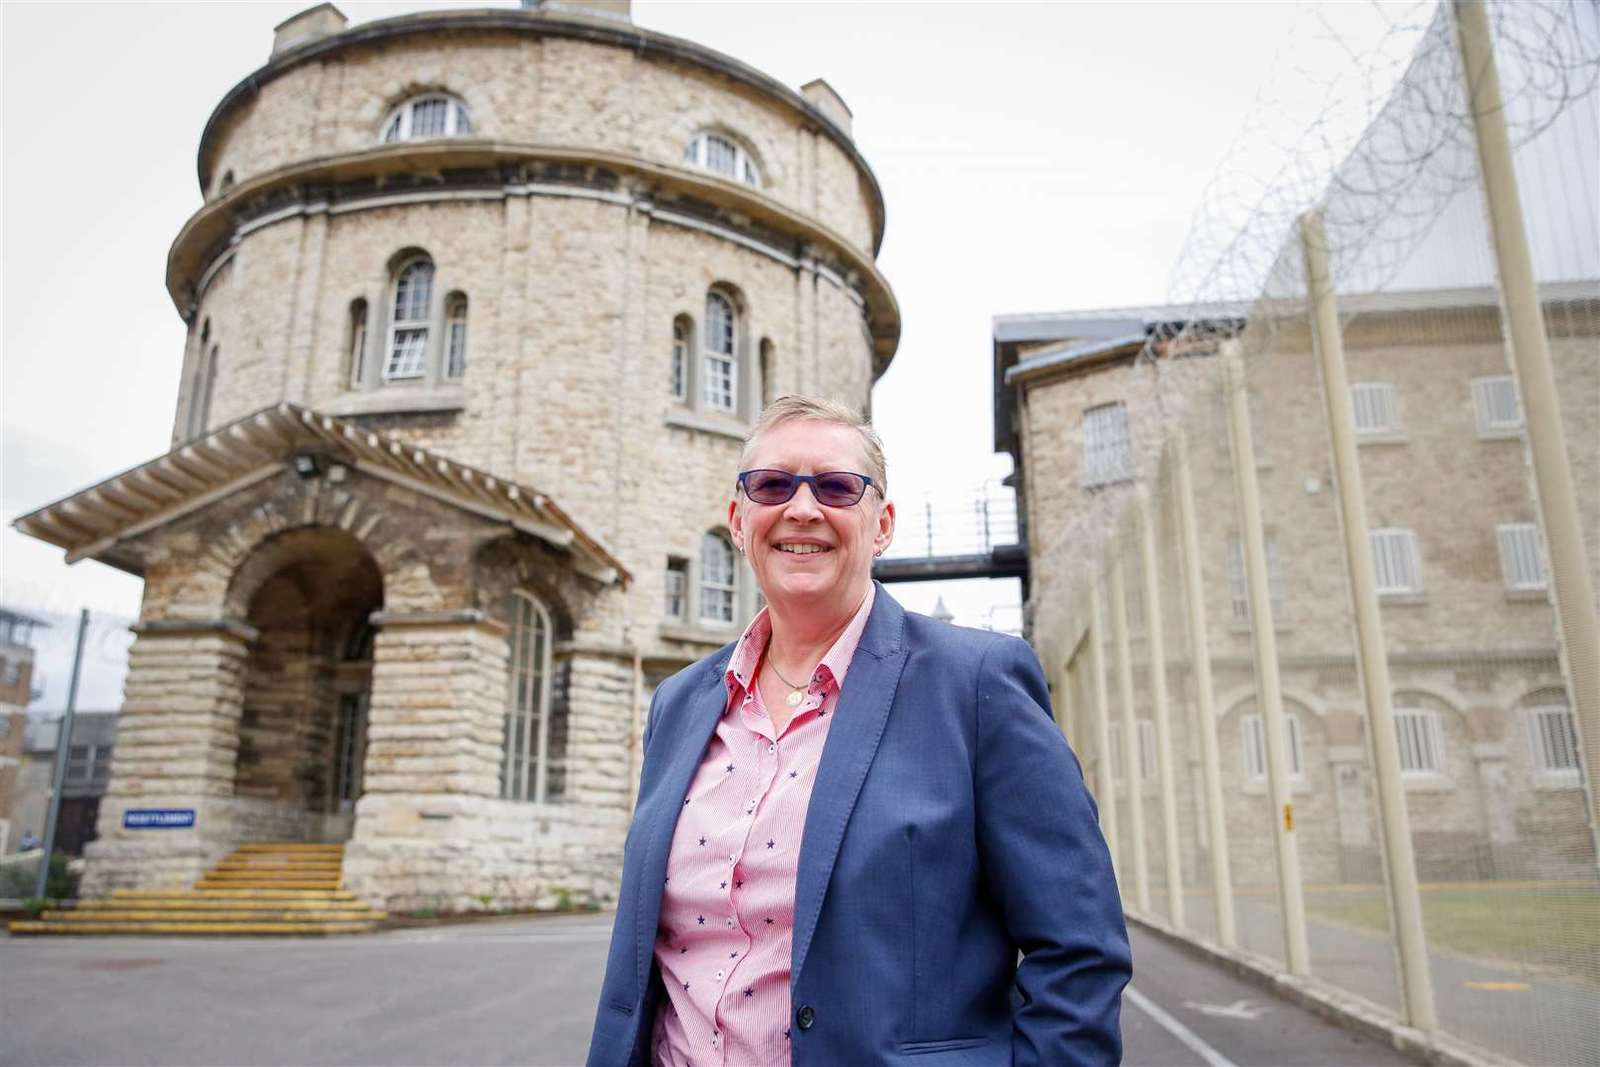 meet-maidstone-prisons-new-governor-judith-feline-shes-in-charge-of-600-men-kent-online.jpg